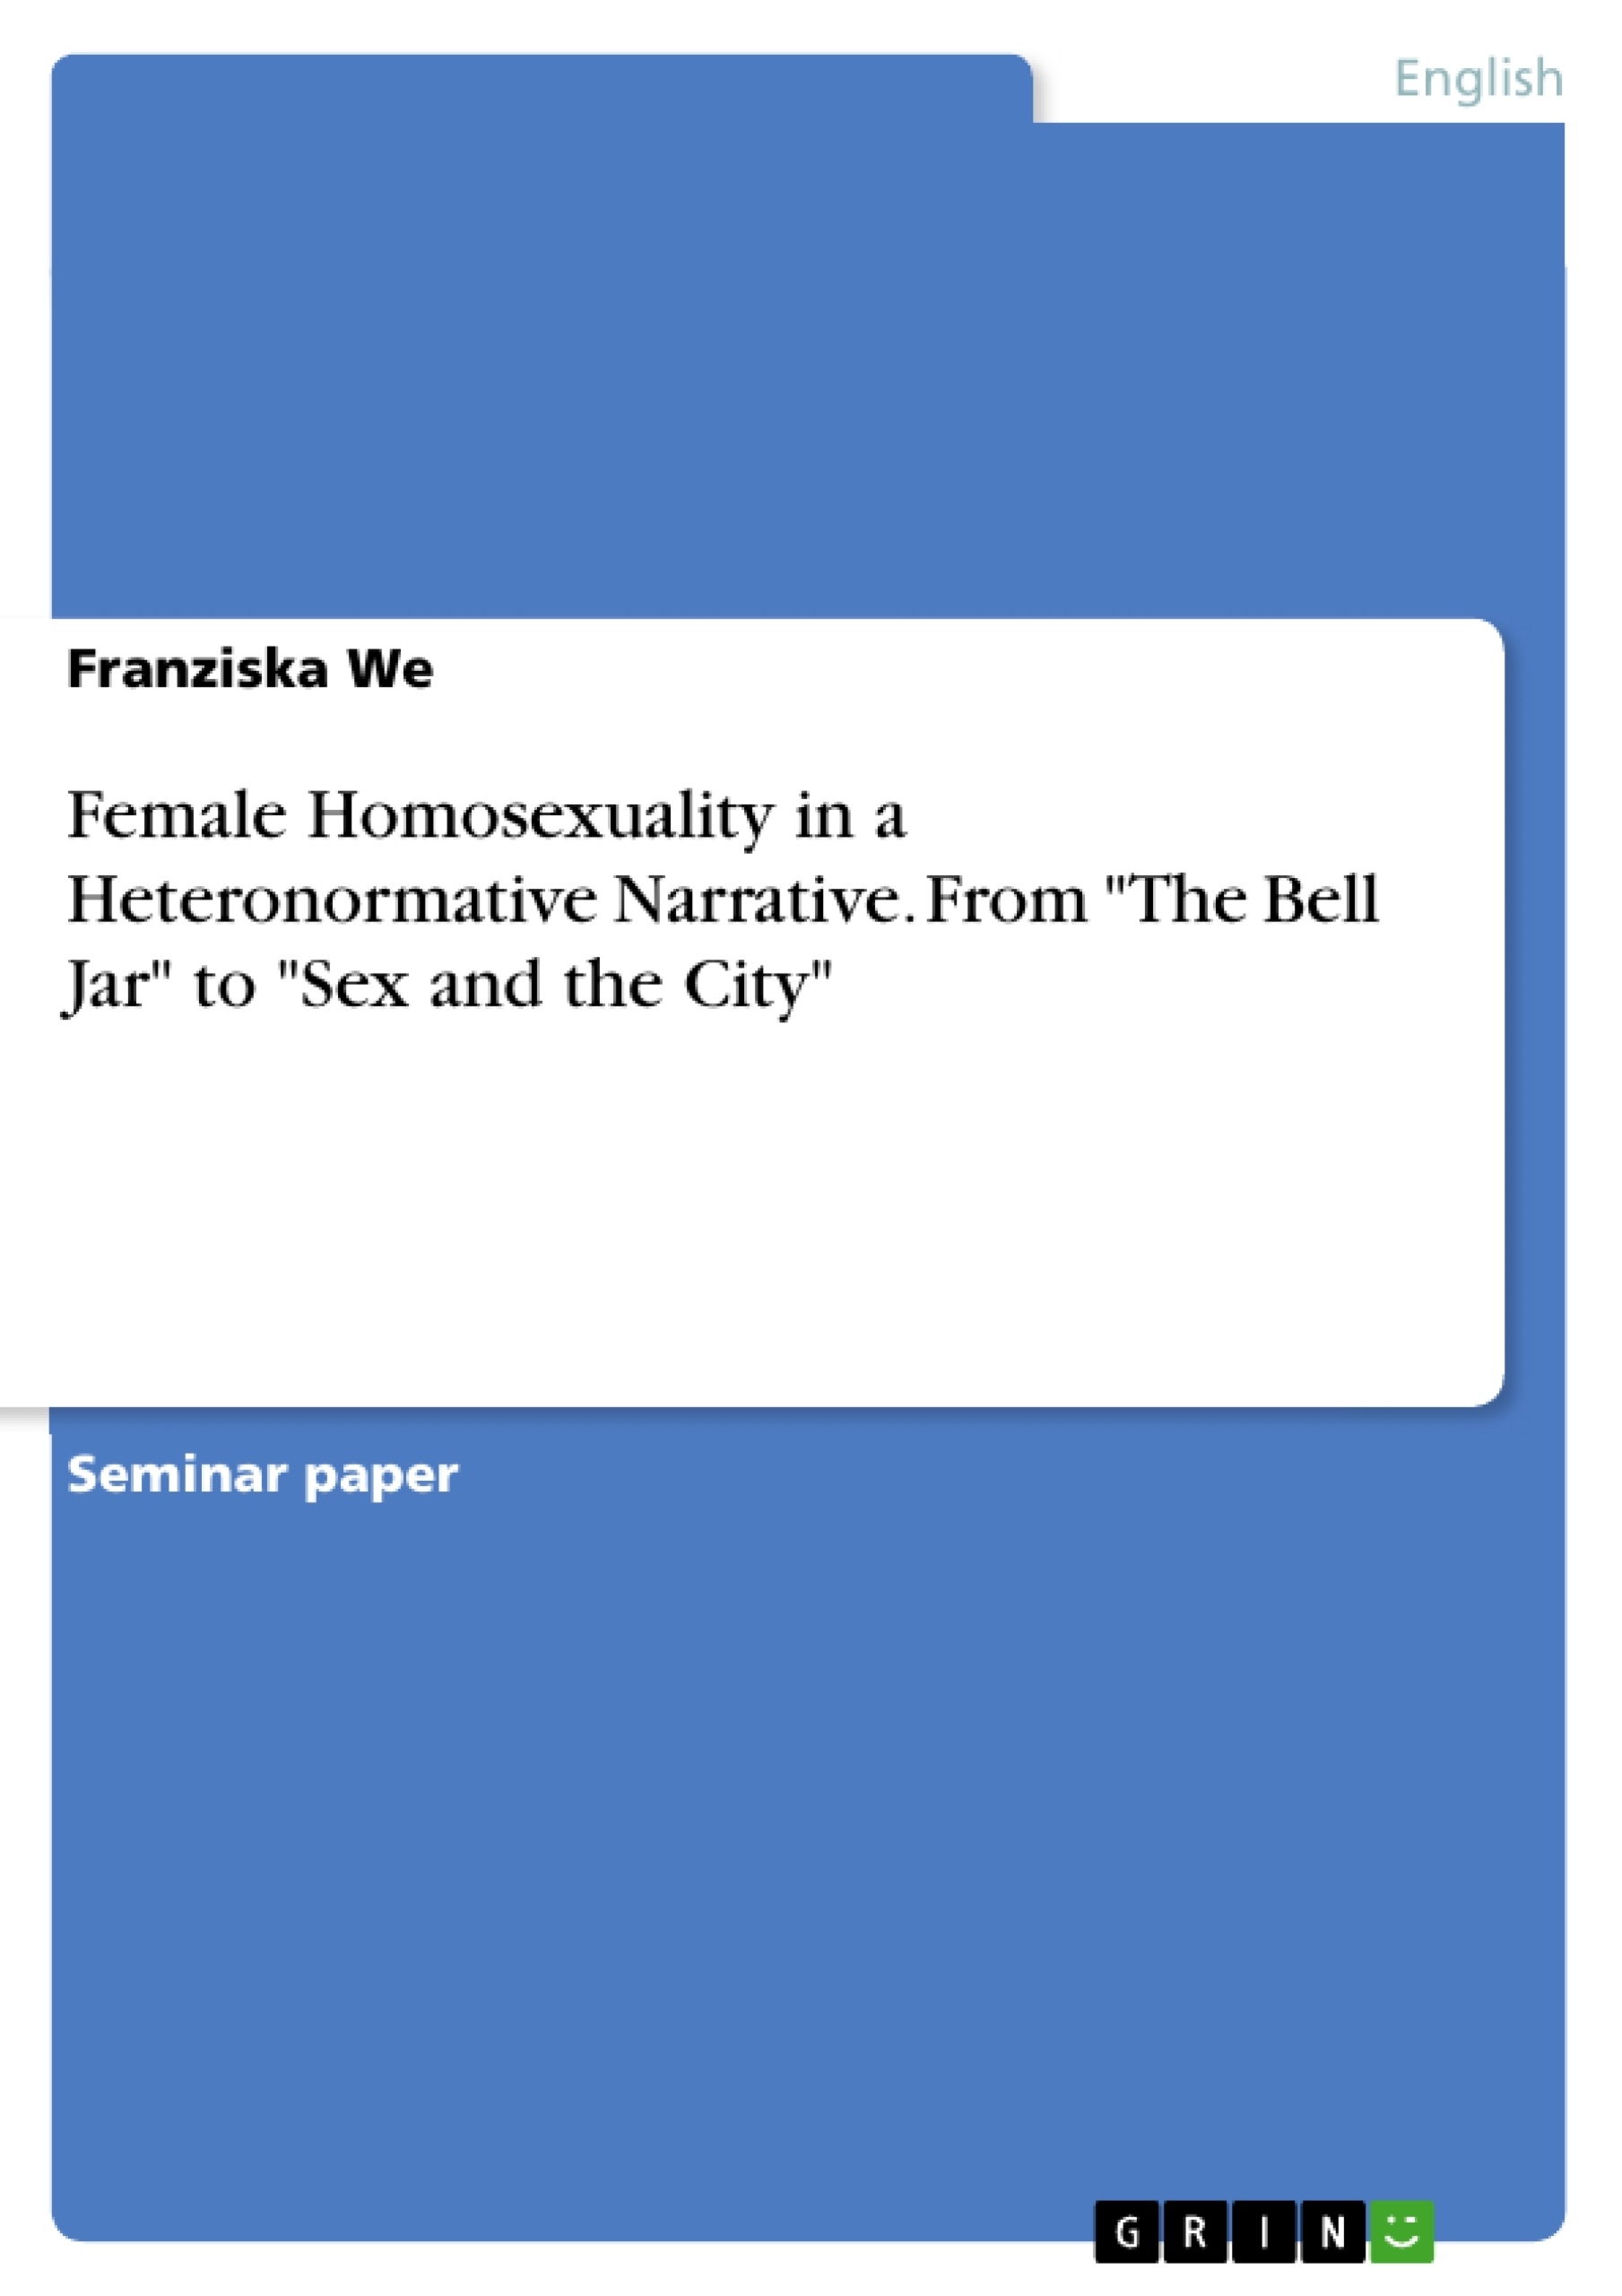 Title: Female Homosexuality in a Heteronormative Narrative. From "The Bell Jar" to "Sex and the City"